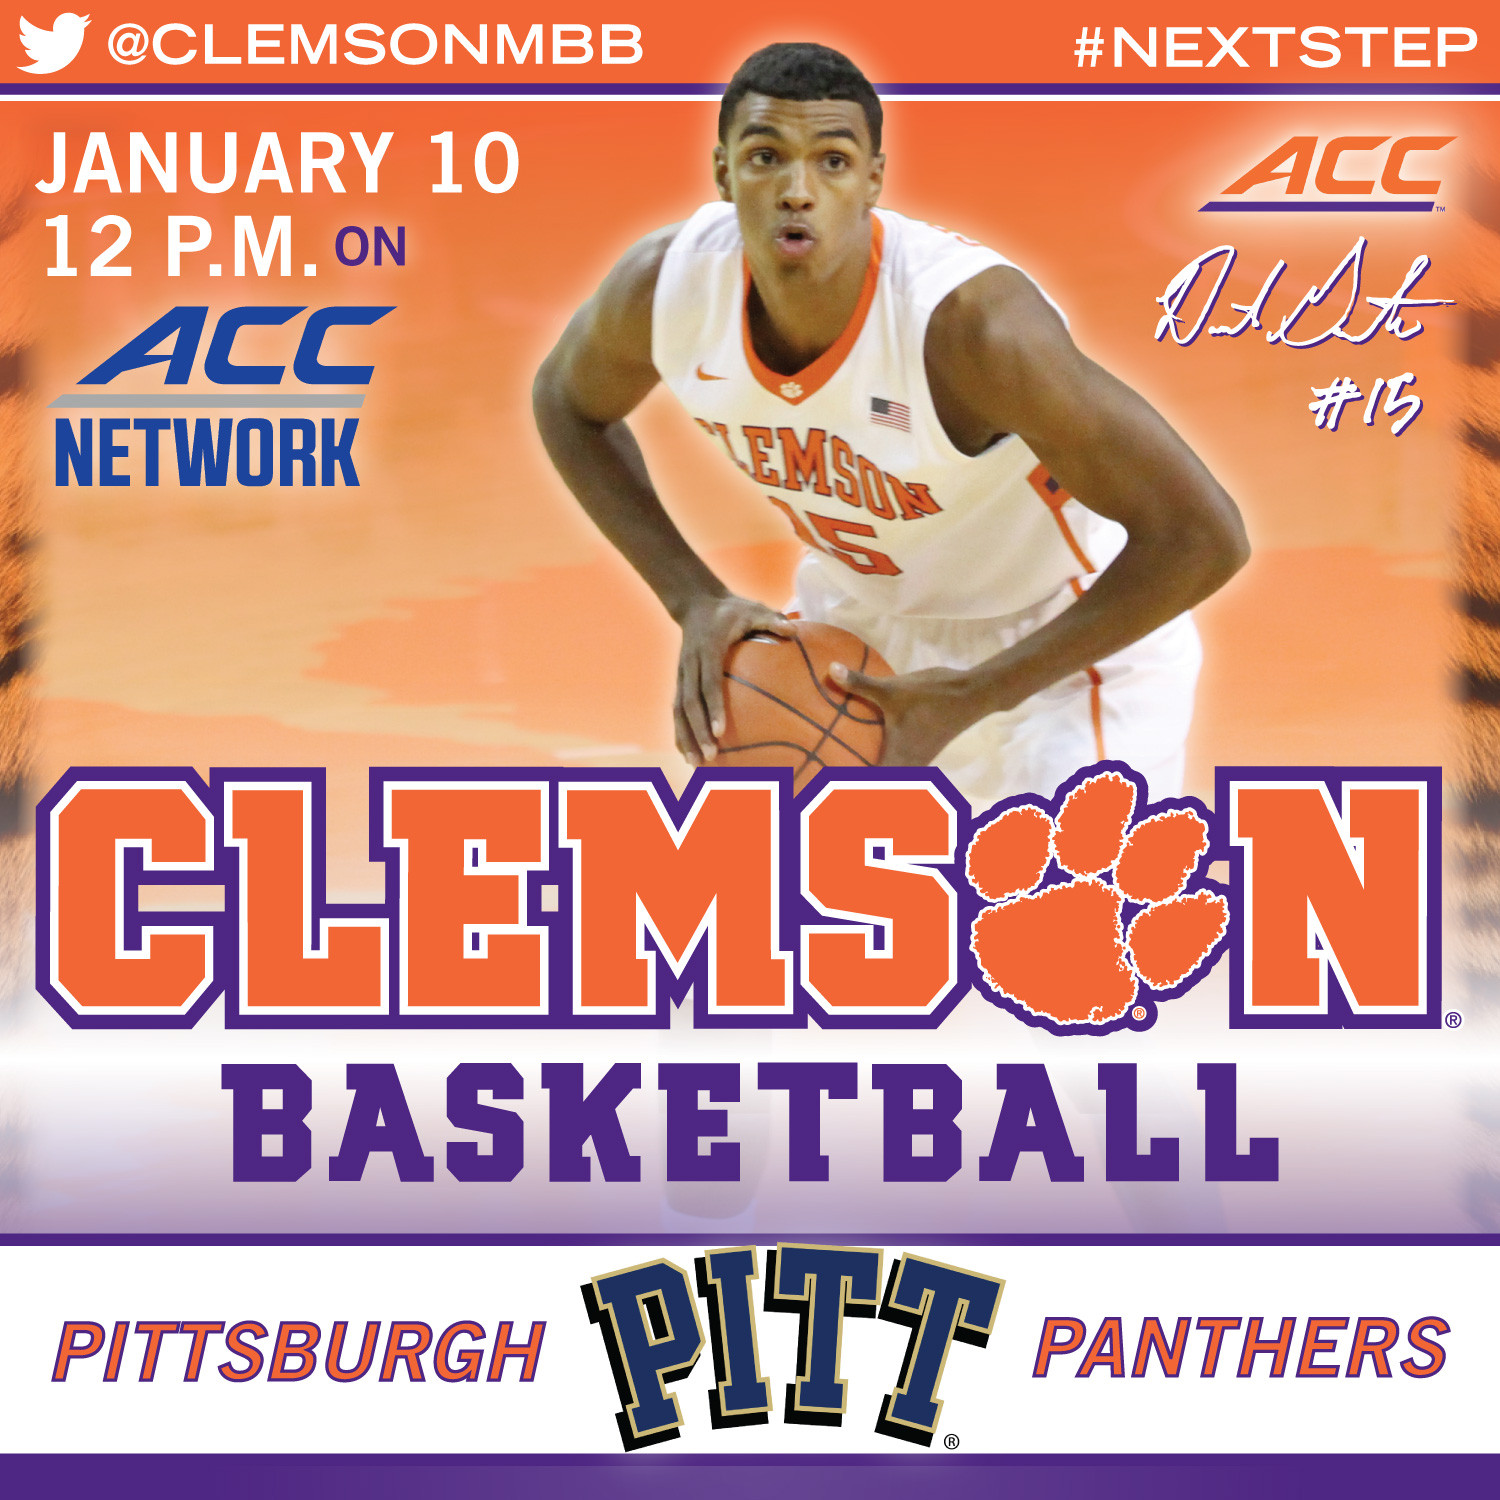 Tigers Travel to Pittsburgh